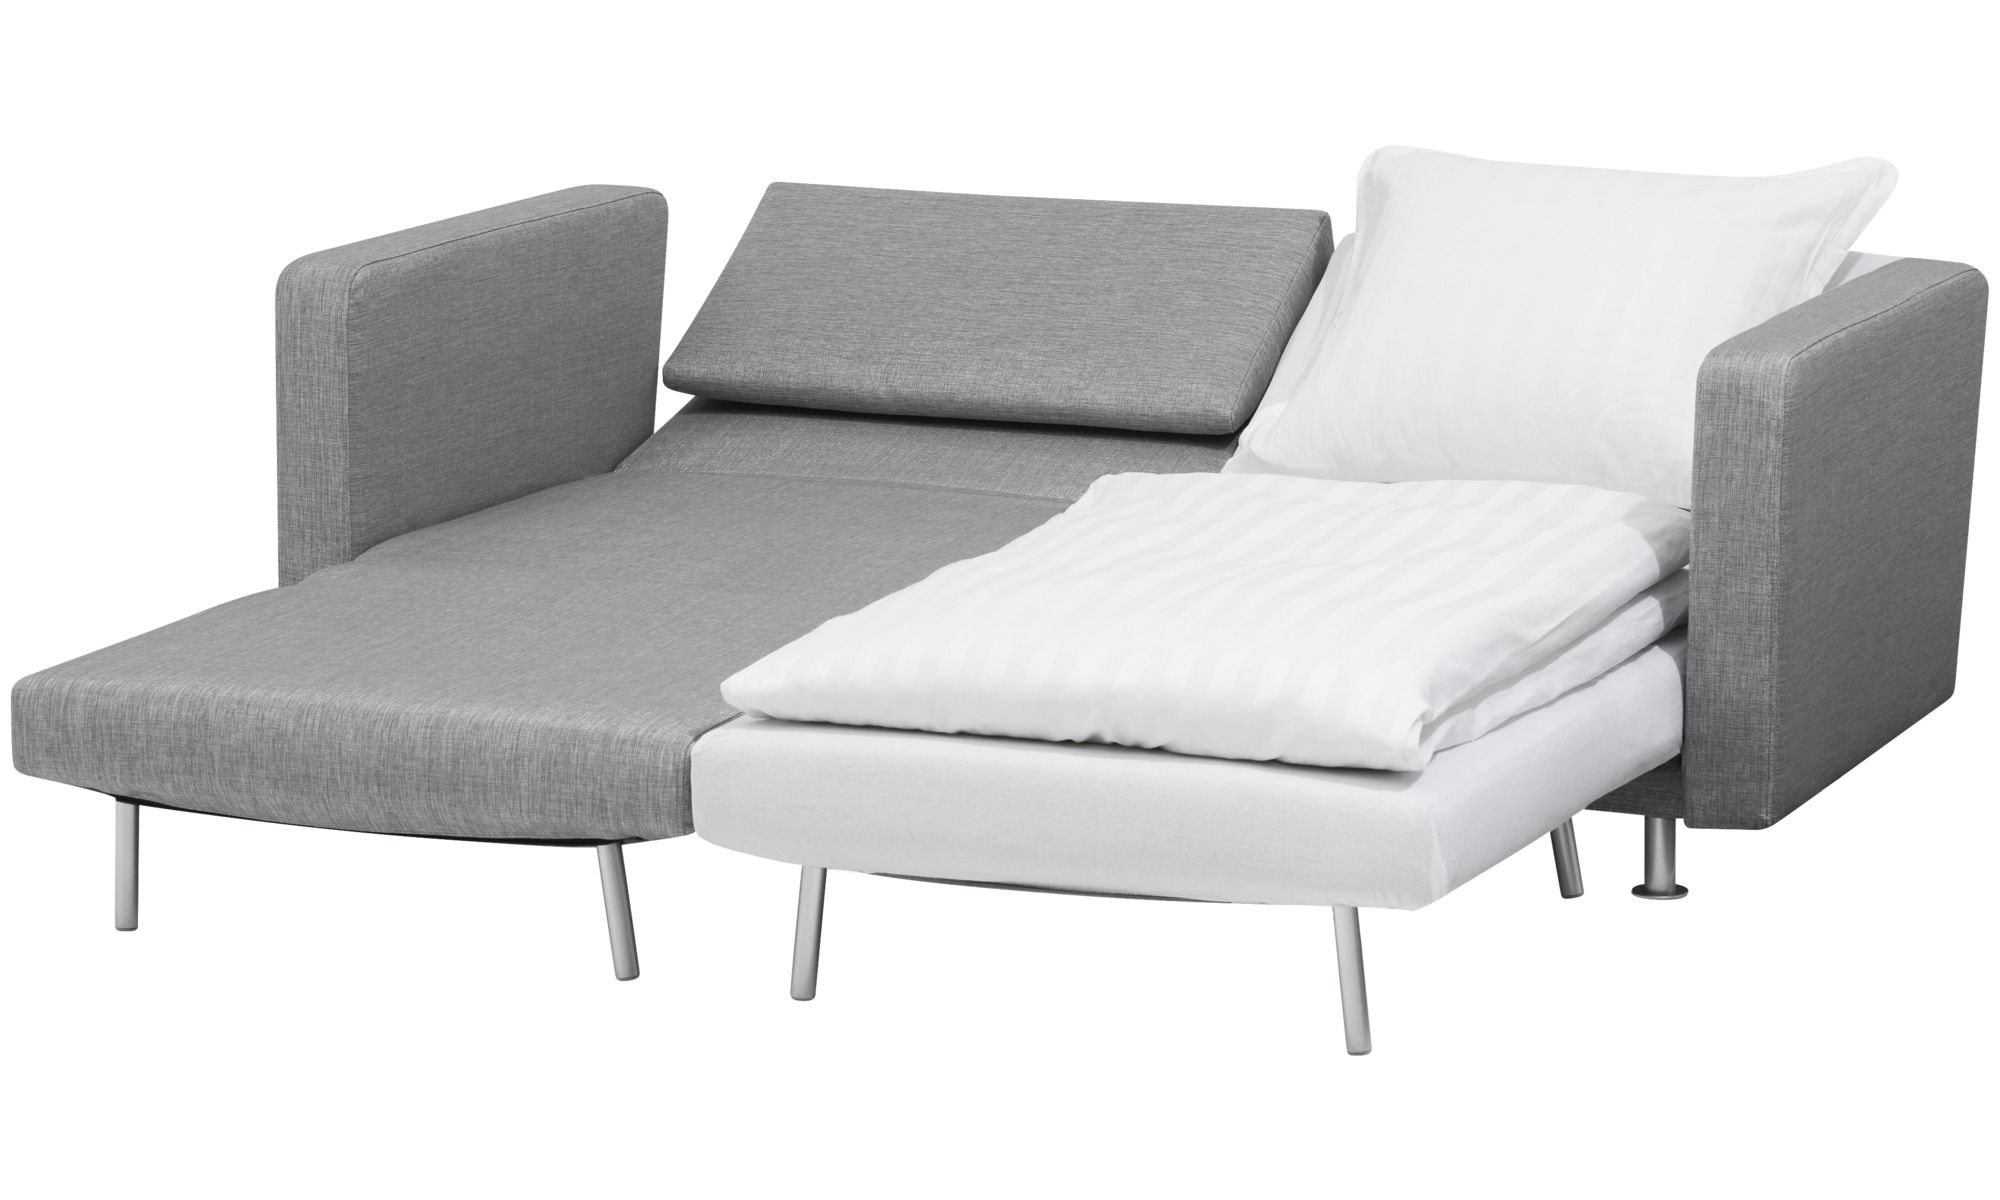 Most Recently Released Sofa Beds – Melo 2 Sofa With Reclining And Sleeping Function Pertaining To Chaise Lounge Sofa Beds (View 4 of 15)